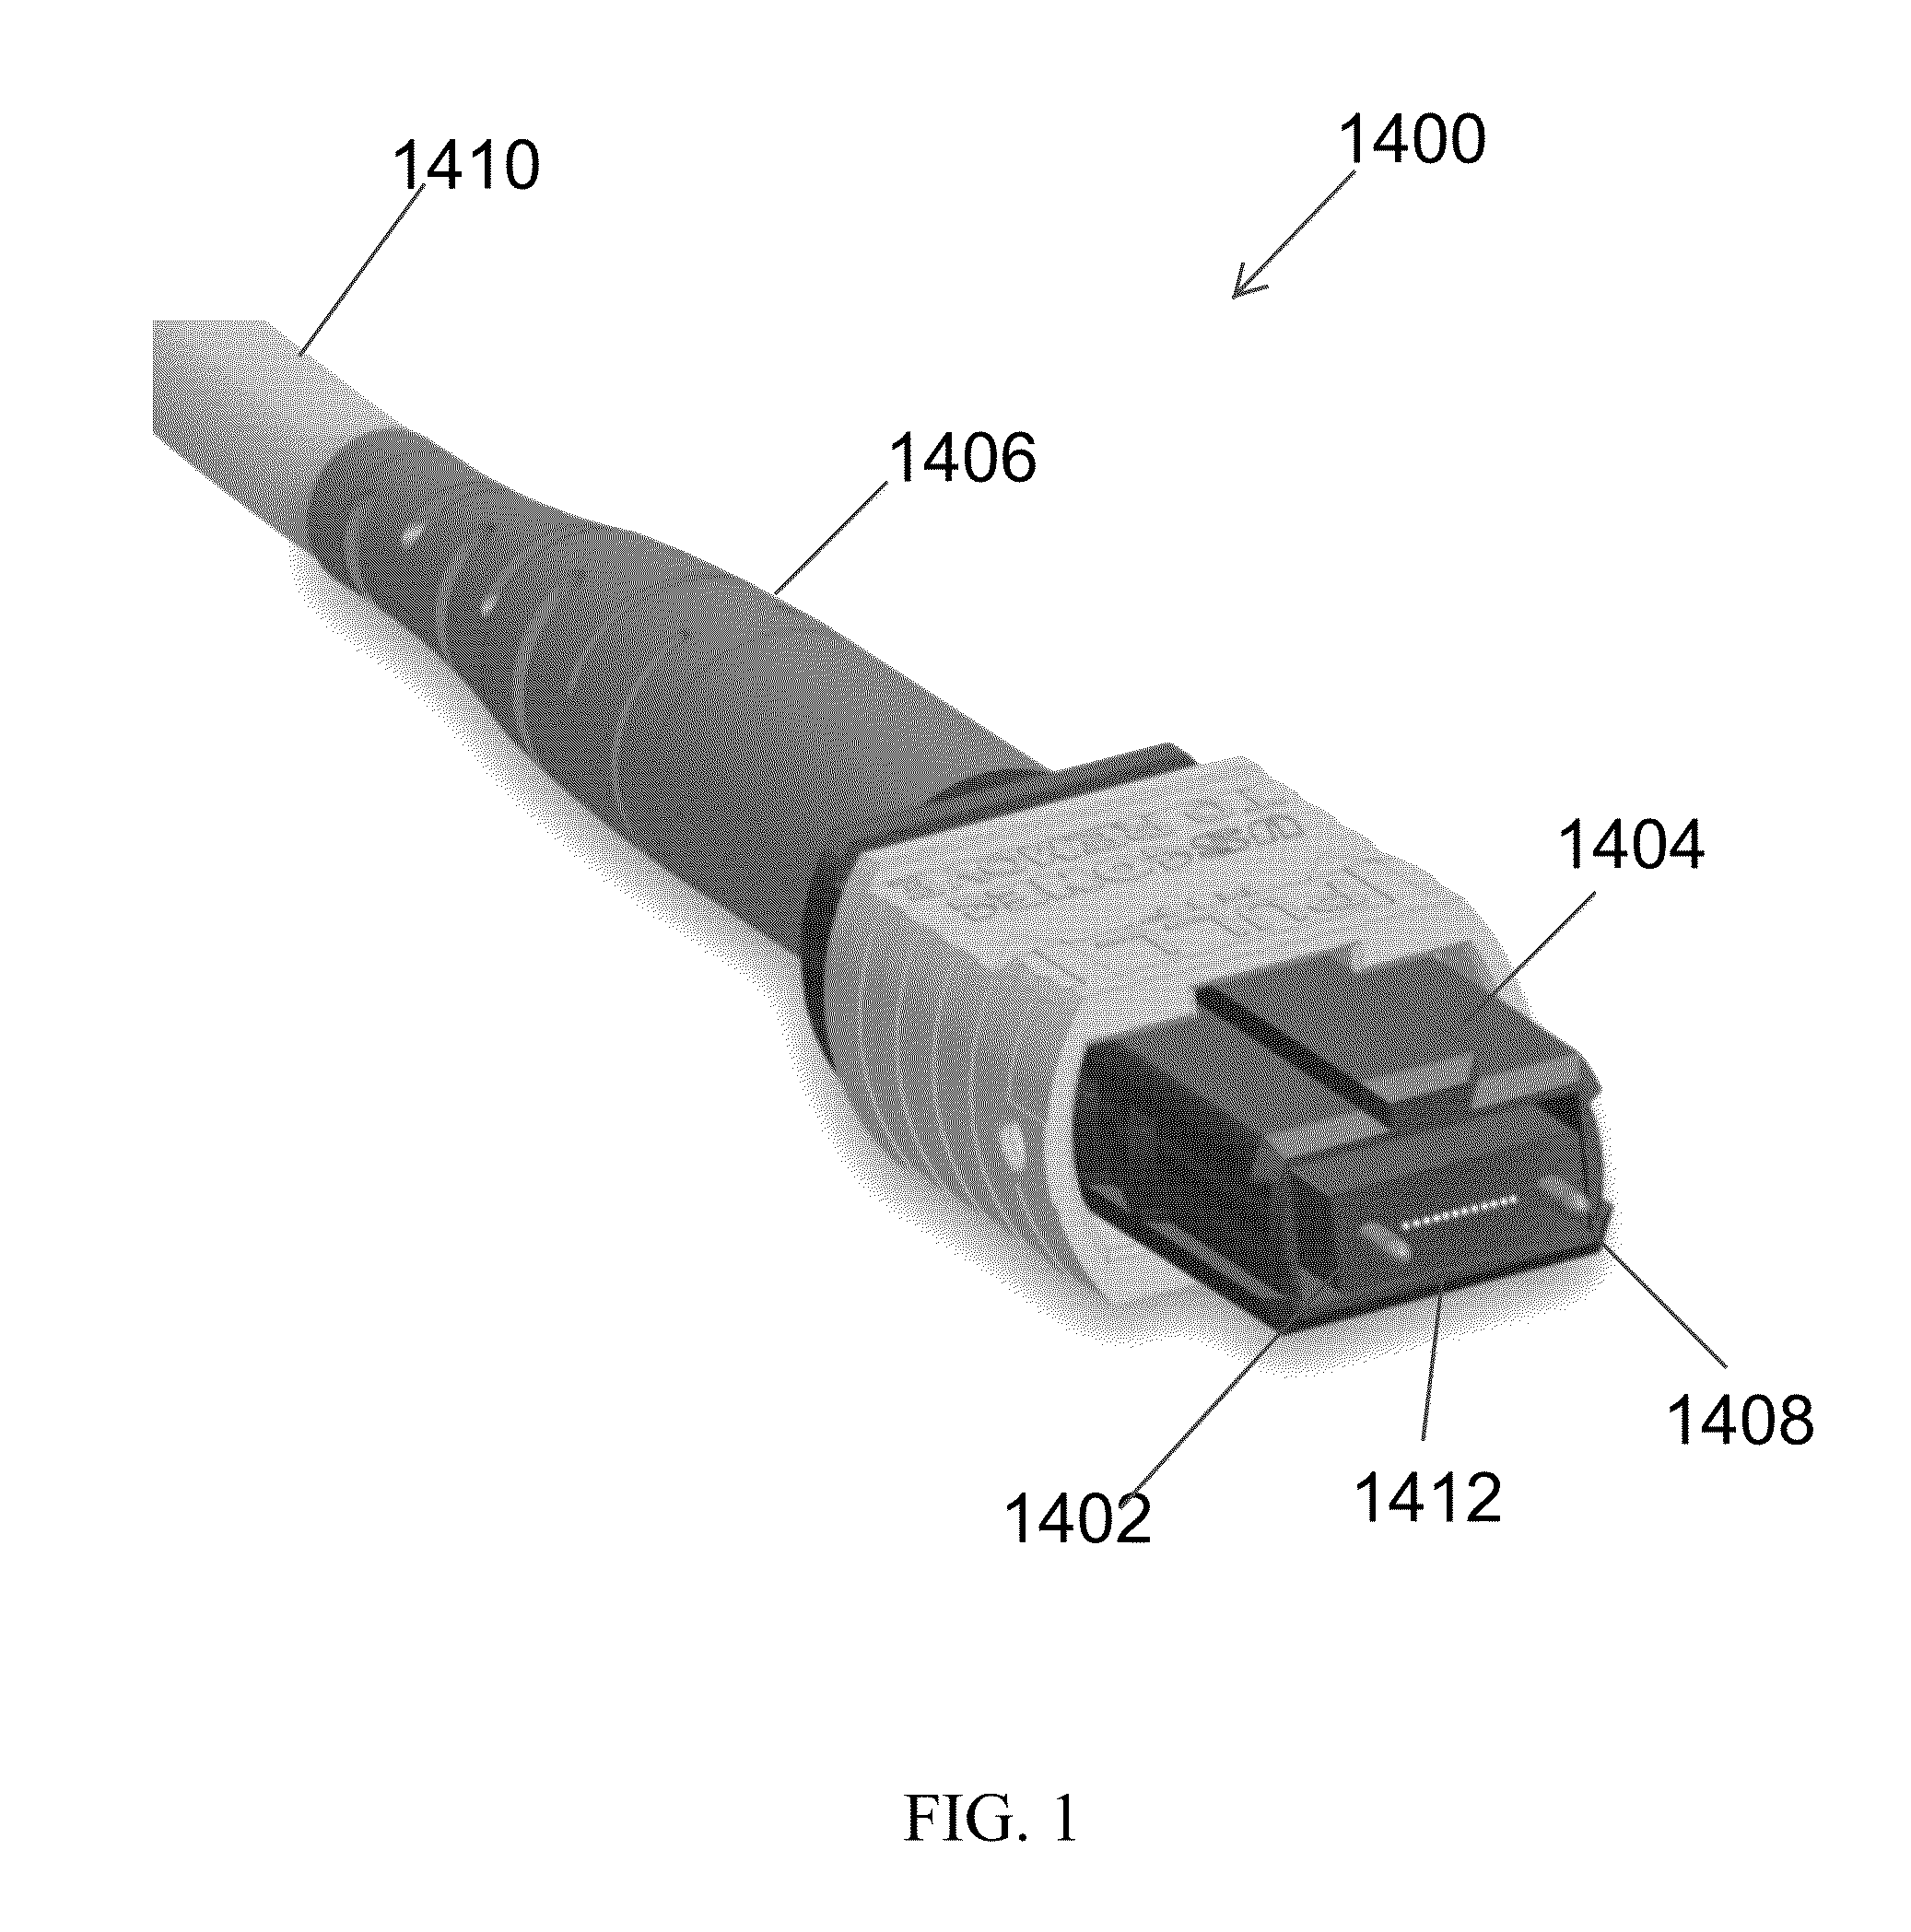 Ferrule for optical fiber connector having a compliant structure for clamping alignment pins